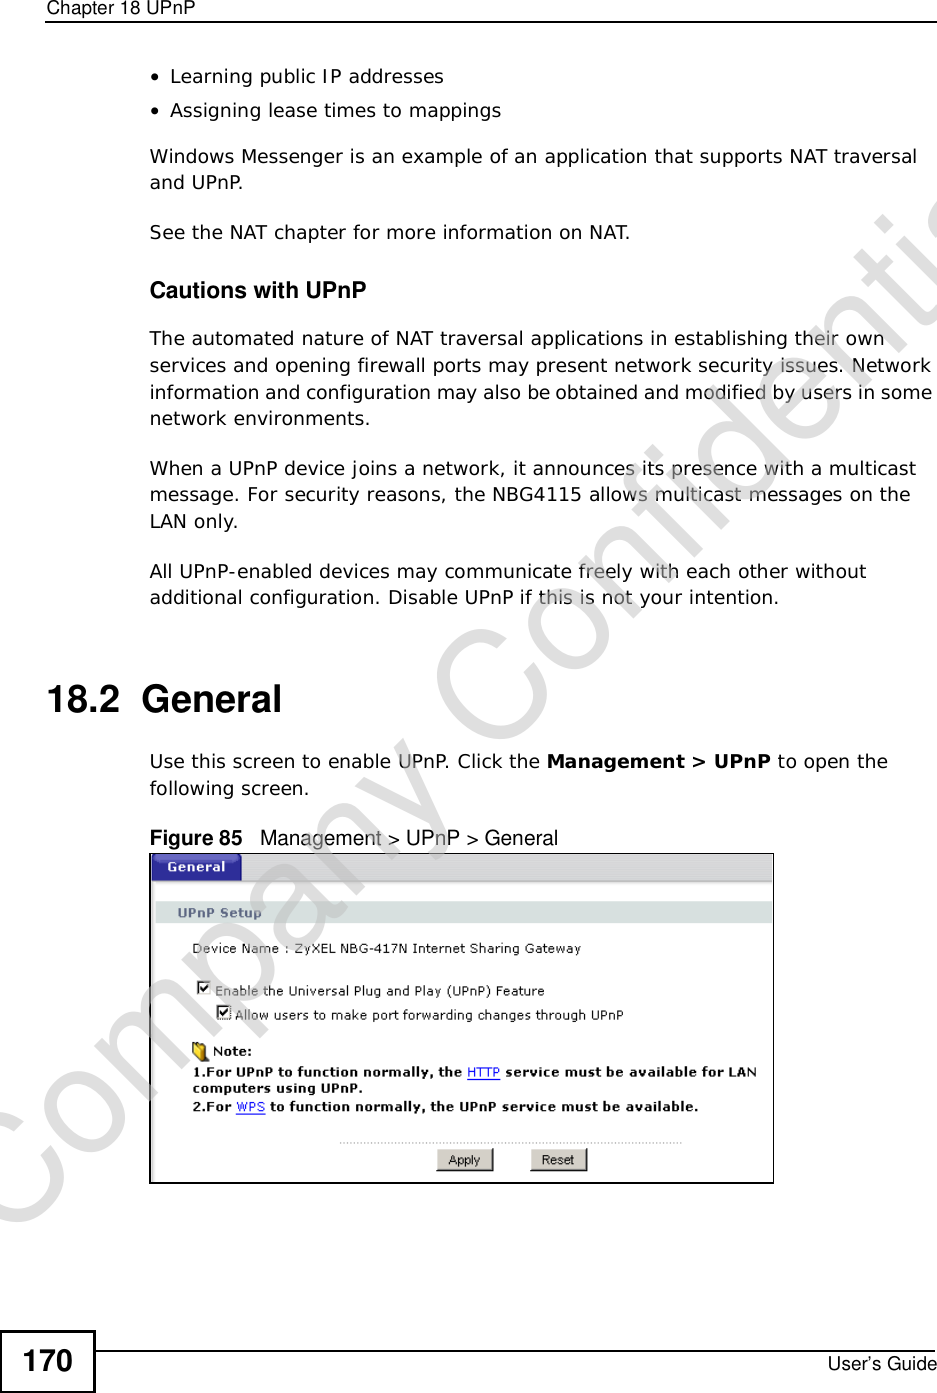 Chapter 18UPnPUser’s Guide170•Learning public IP addresses•Assigning lease times to mappingsWindows Messenger is an example of an application that supports NAT traversal and UPnP. See the NAT chapter for more information on NAT.Cautions with UPnPThe automated nature of NAT traversal applications in establishing their own services and opening firewall ports may present network security issues. Network information and configuration may also be obtained and modified by users in some network environments. When a UPnP device joins a network, it announces its presence with a multicast message. For security reasons, the NBG4115 allows multicast messages on the LAN only.All UPnP-enabled devices may communicate freely with each other without additional configuration. Disable UPnP if this is not your intention. 18.2  GeneralUse this screen to enable UPnP. Click the Management &gt; UPnP to open the following screen.Figure 85   Management &gt; UPnP &gt; General Company Confidential